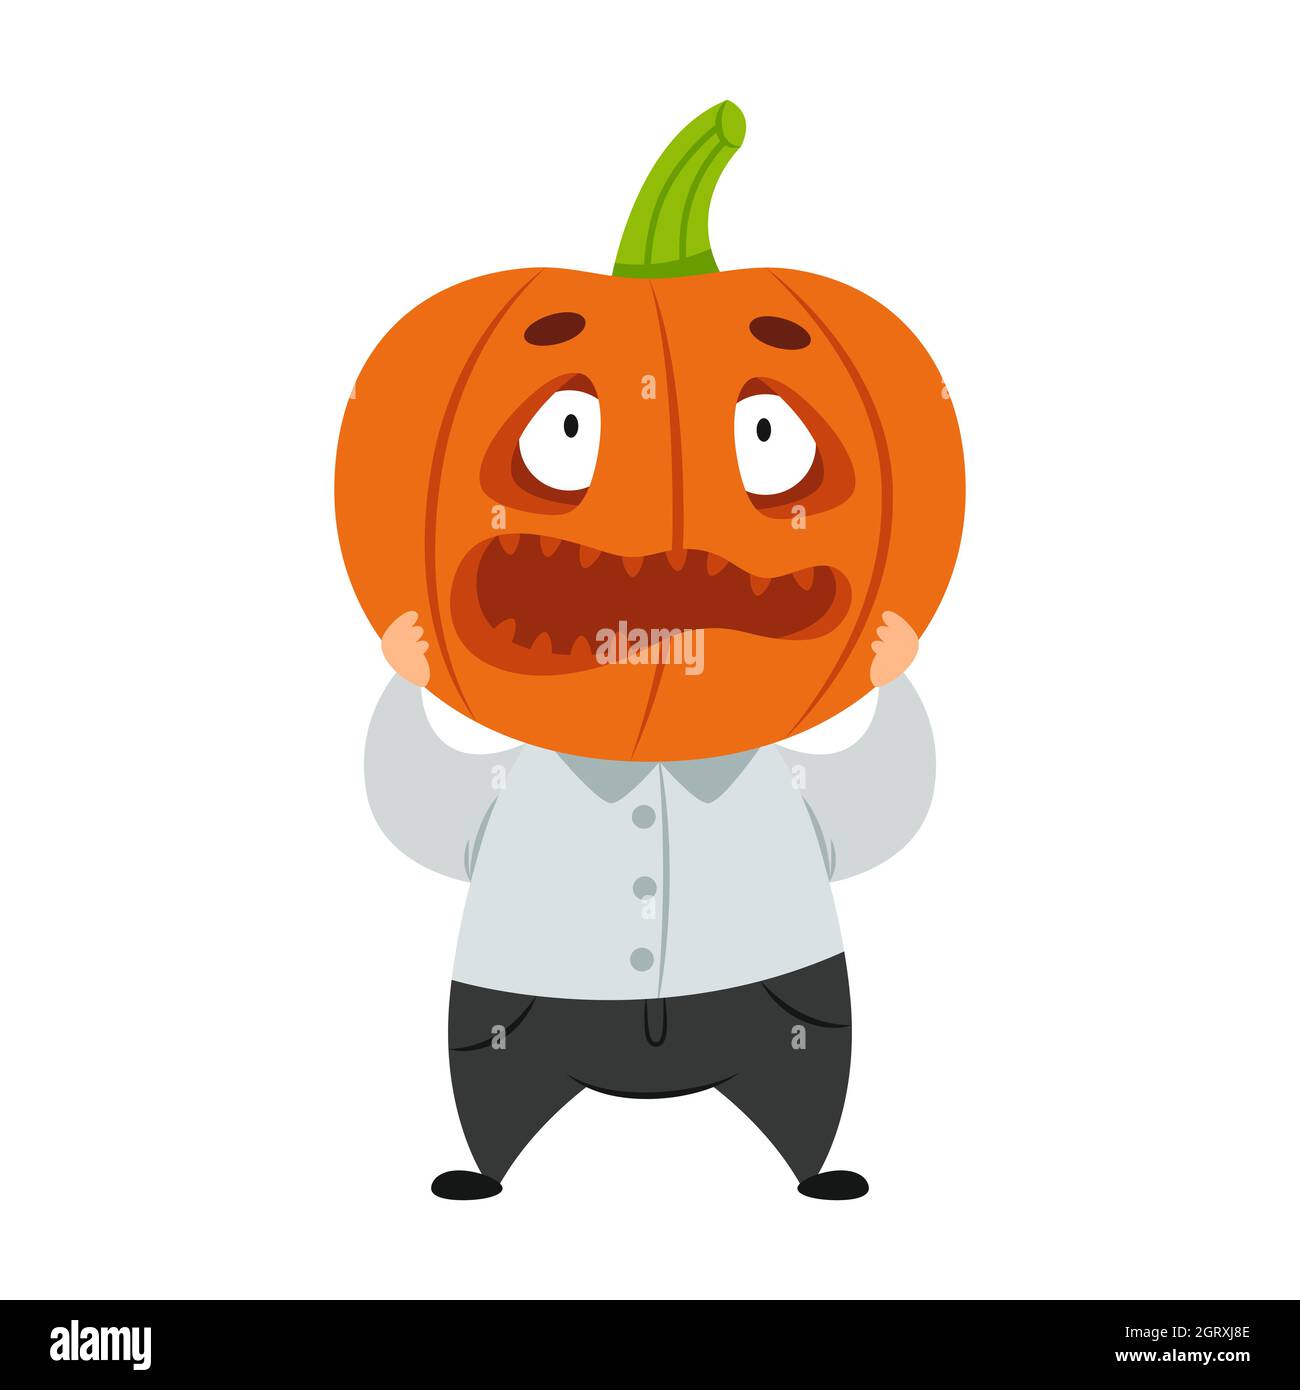 Funny Halloween pumpkin character. Festive costume for spooky party. Scared facial expression. Cool print with monster for children's school supplies, Stock Vector